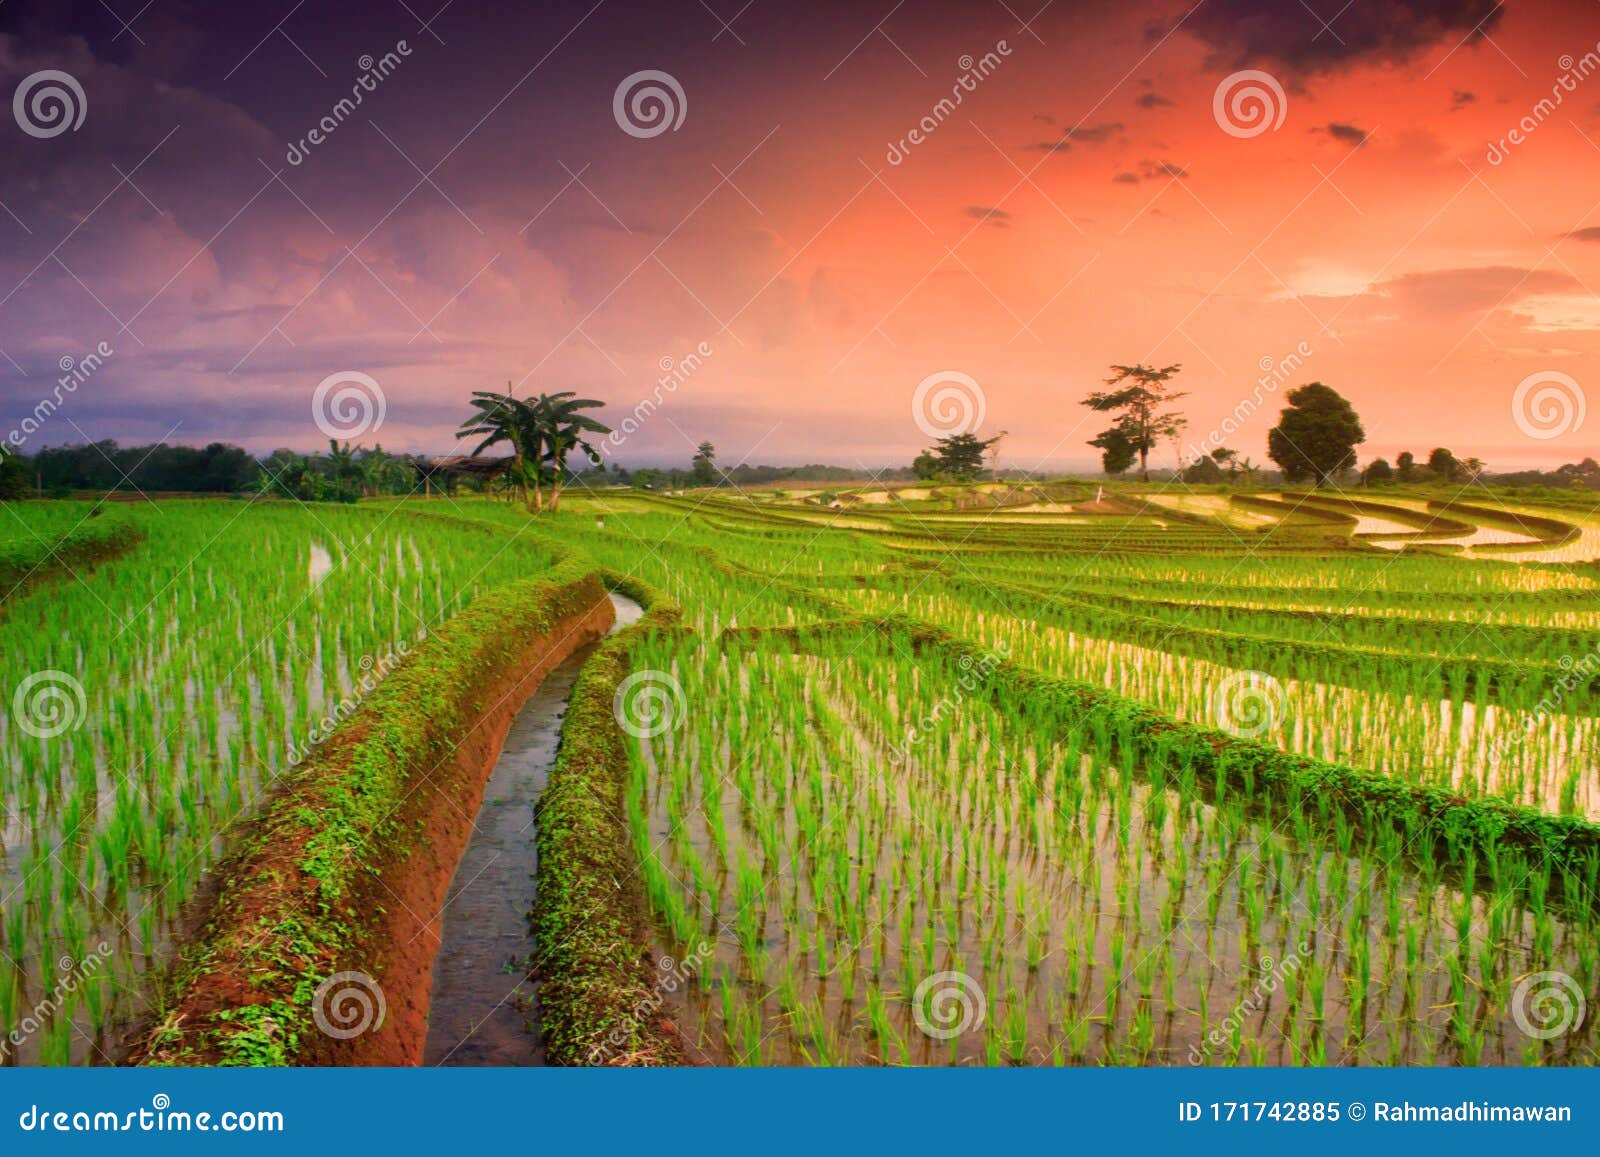 Sunset in the Sy with Beauty Rice Fields Stock Image - Image of  agriculture, farmer: 171742885